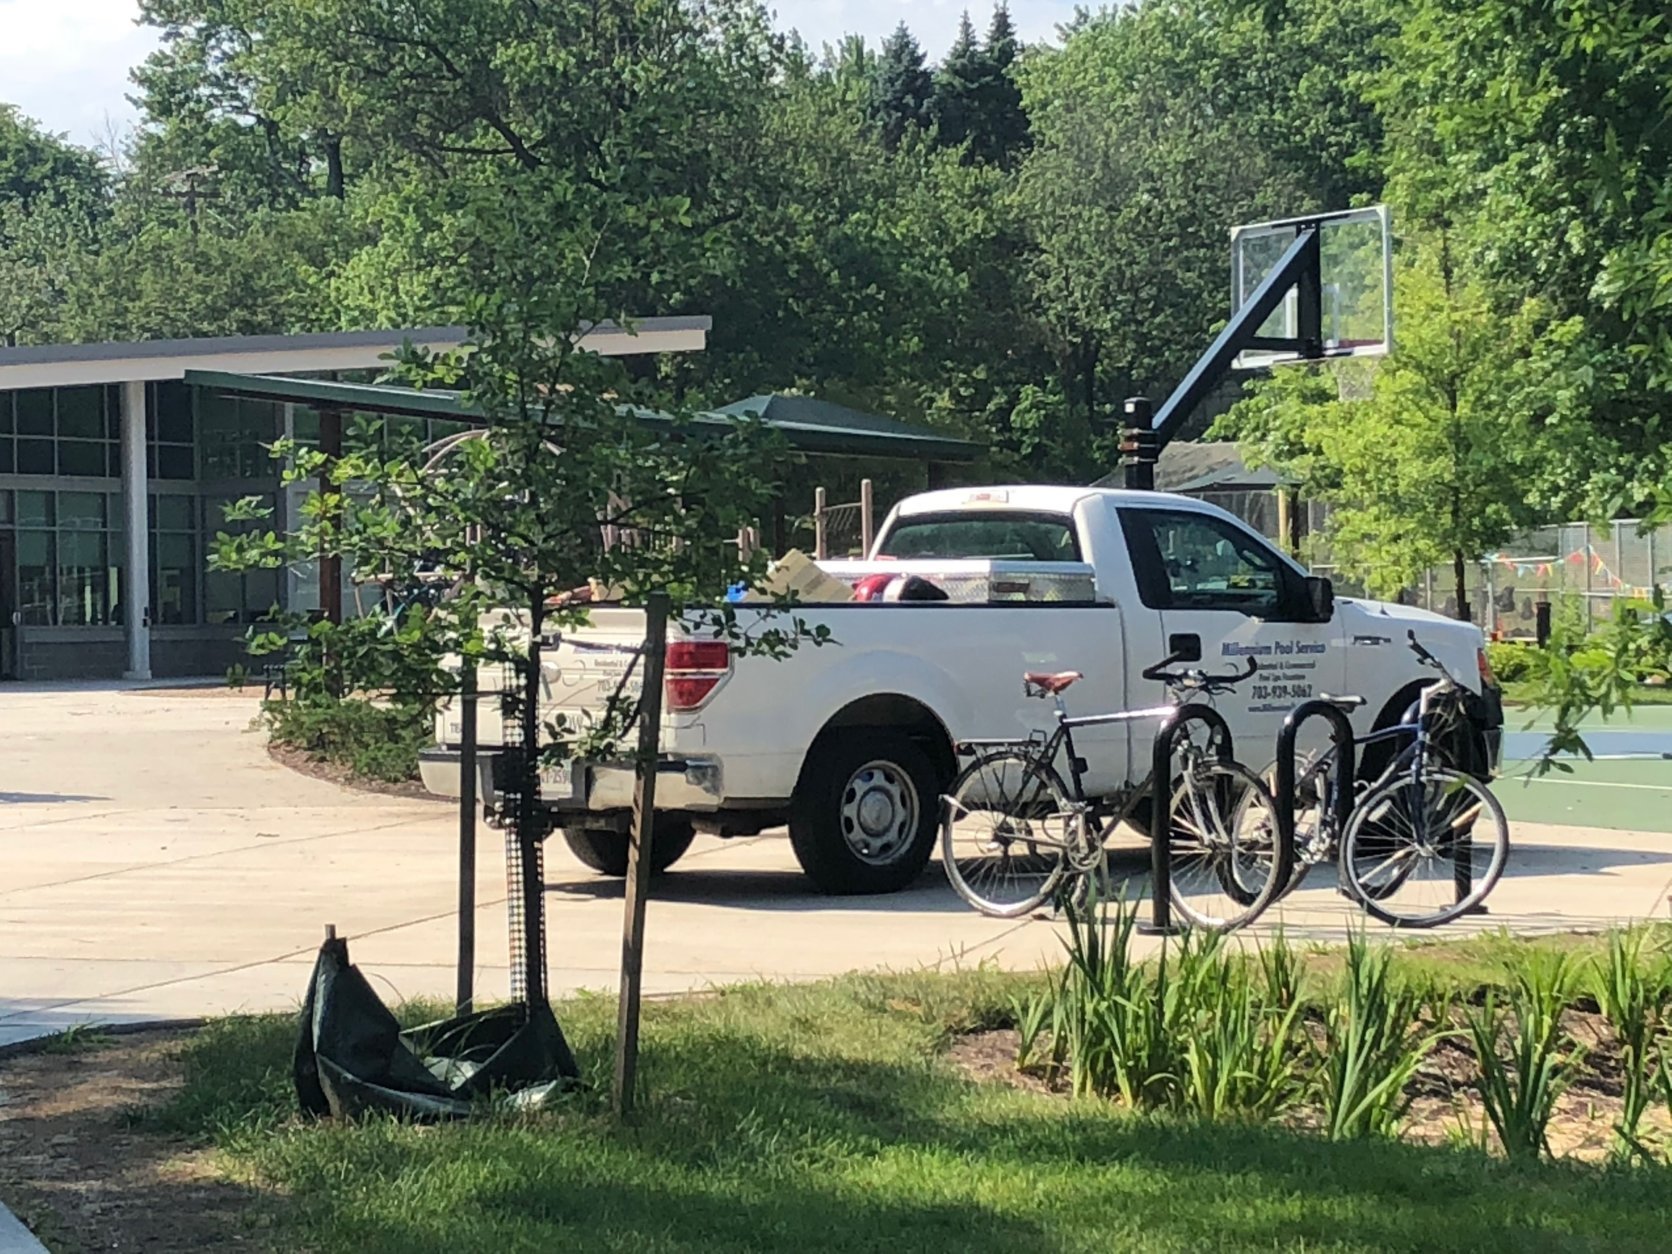 A pool service company is in the park on Tuesday, June 19, to work on fixing the sewage issue. (WTOP/Melissa Howell)